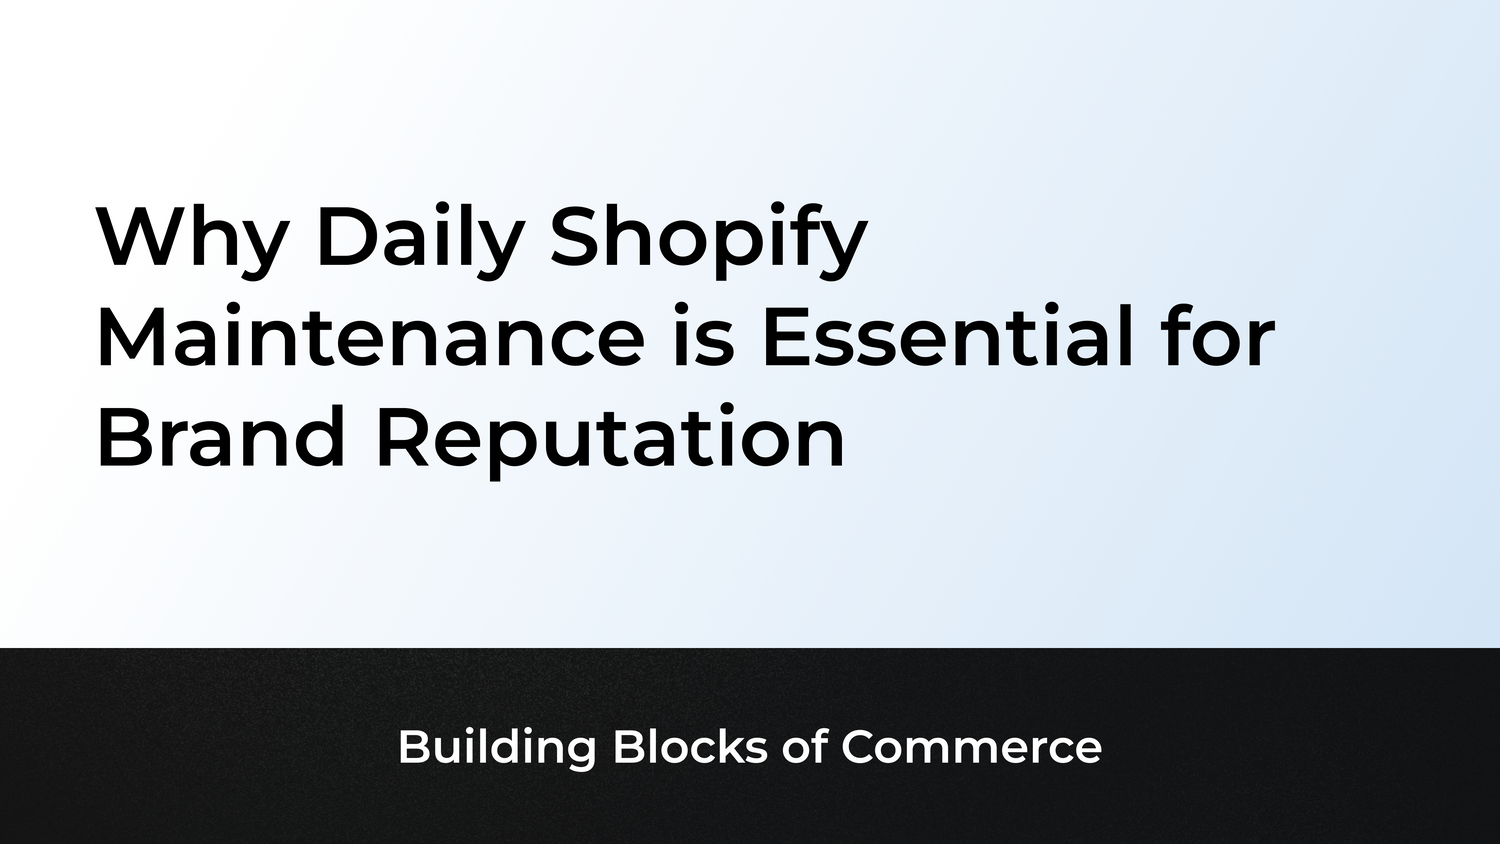 Why Daily Shopify Maintenance is Essential for Brand Reputation